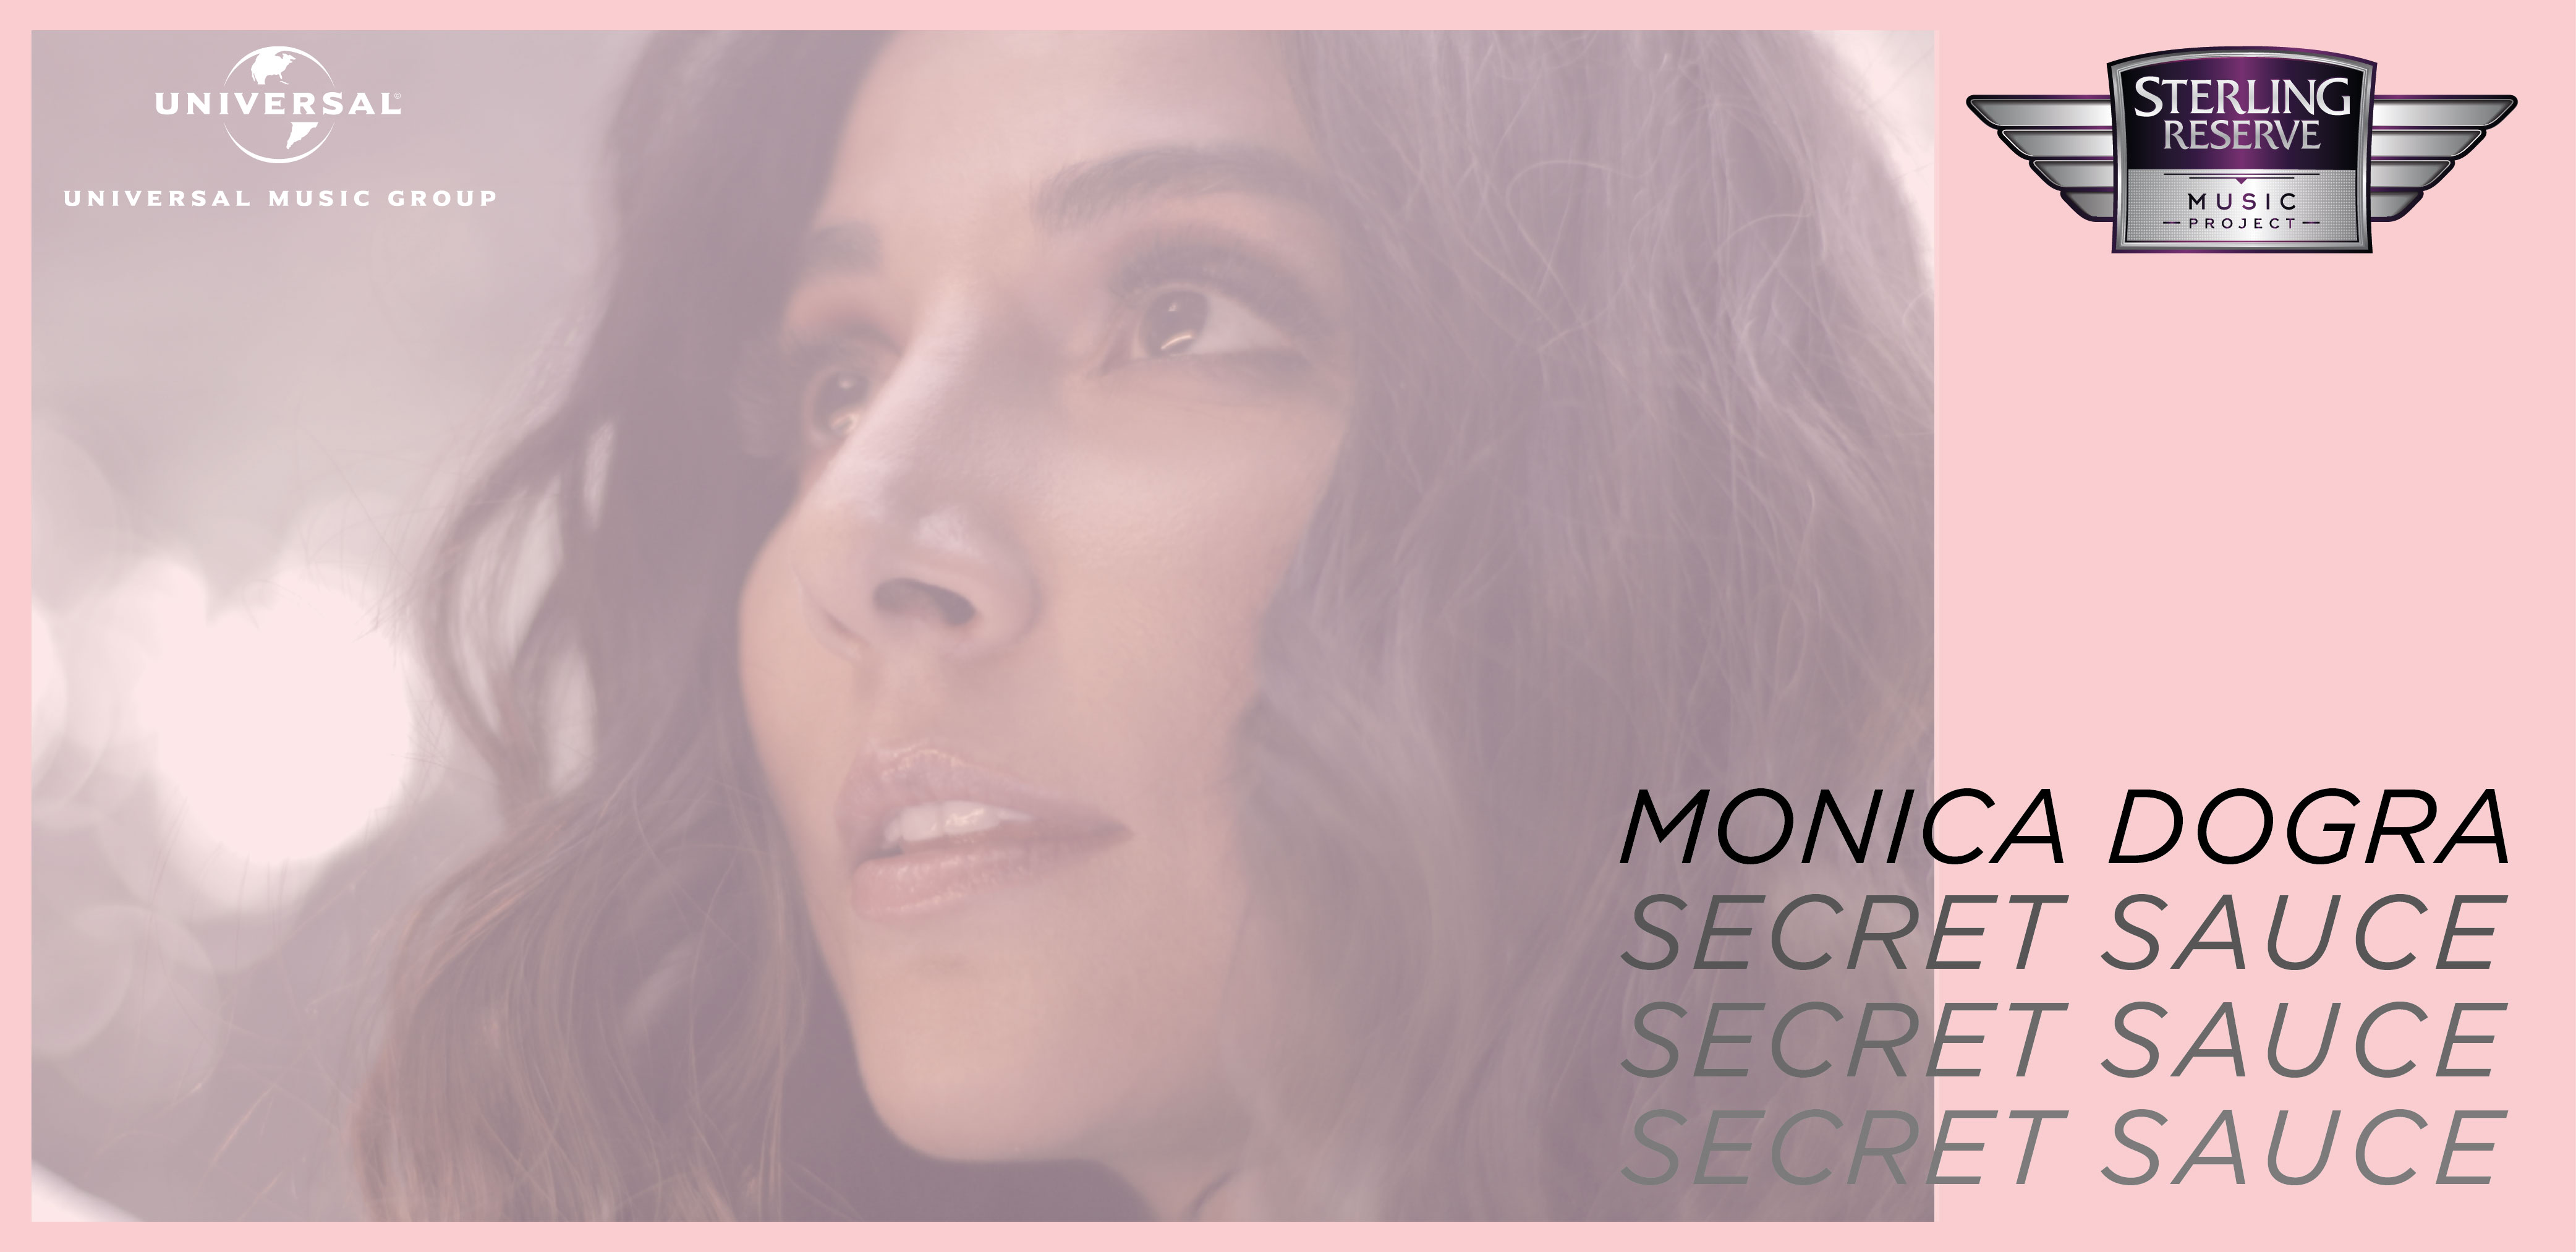 The Sterling Reserve Music Project collaborates with Monica Dogra to launch “Secret Sauce” 